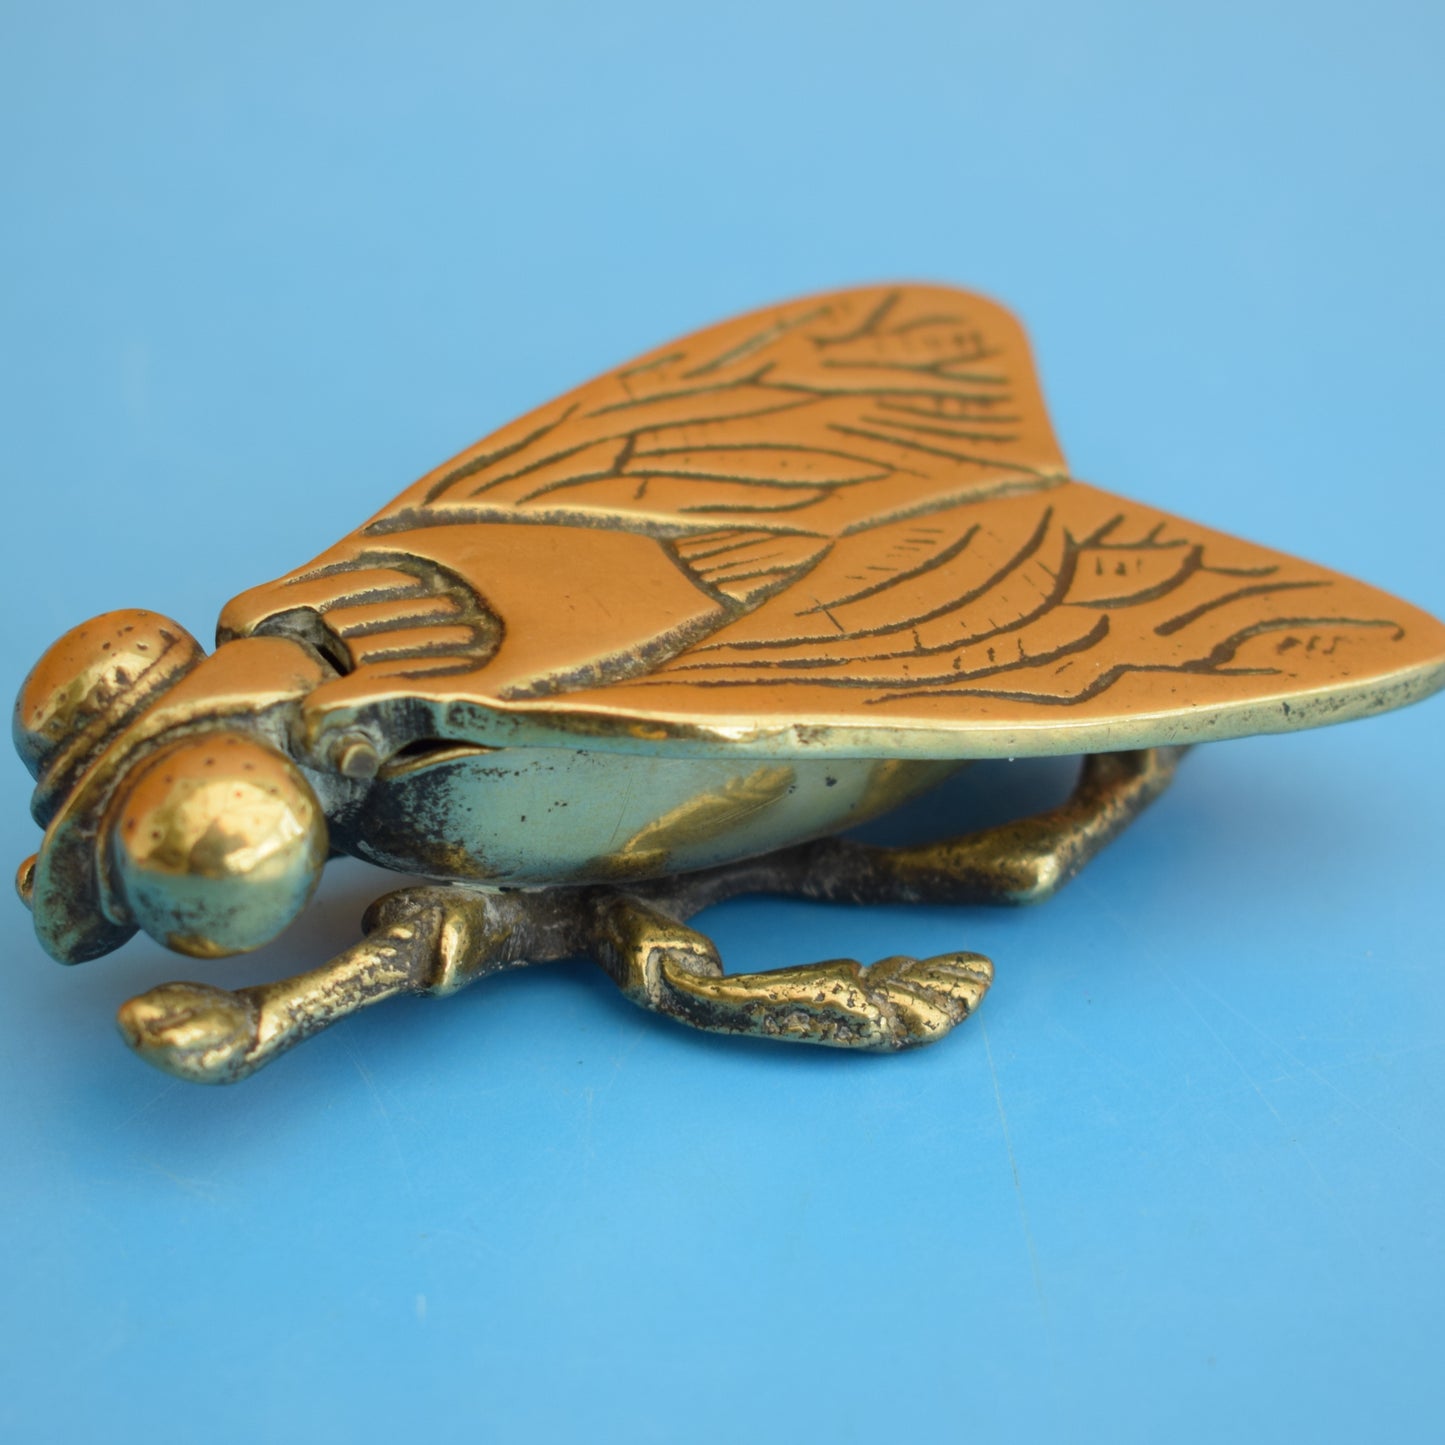 Vintage 1960s Brass Fly Container / Ornament